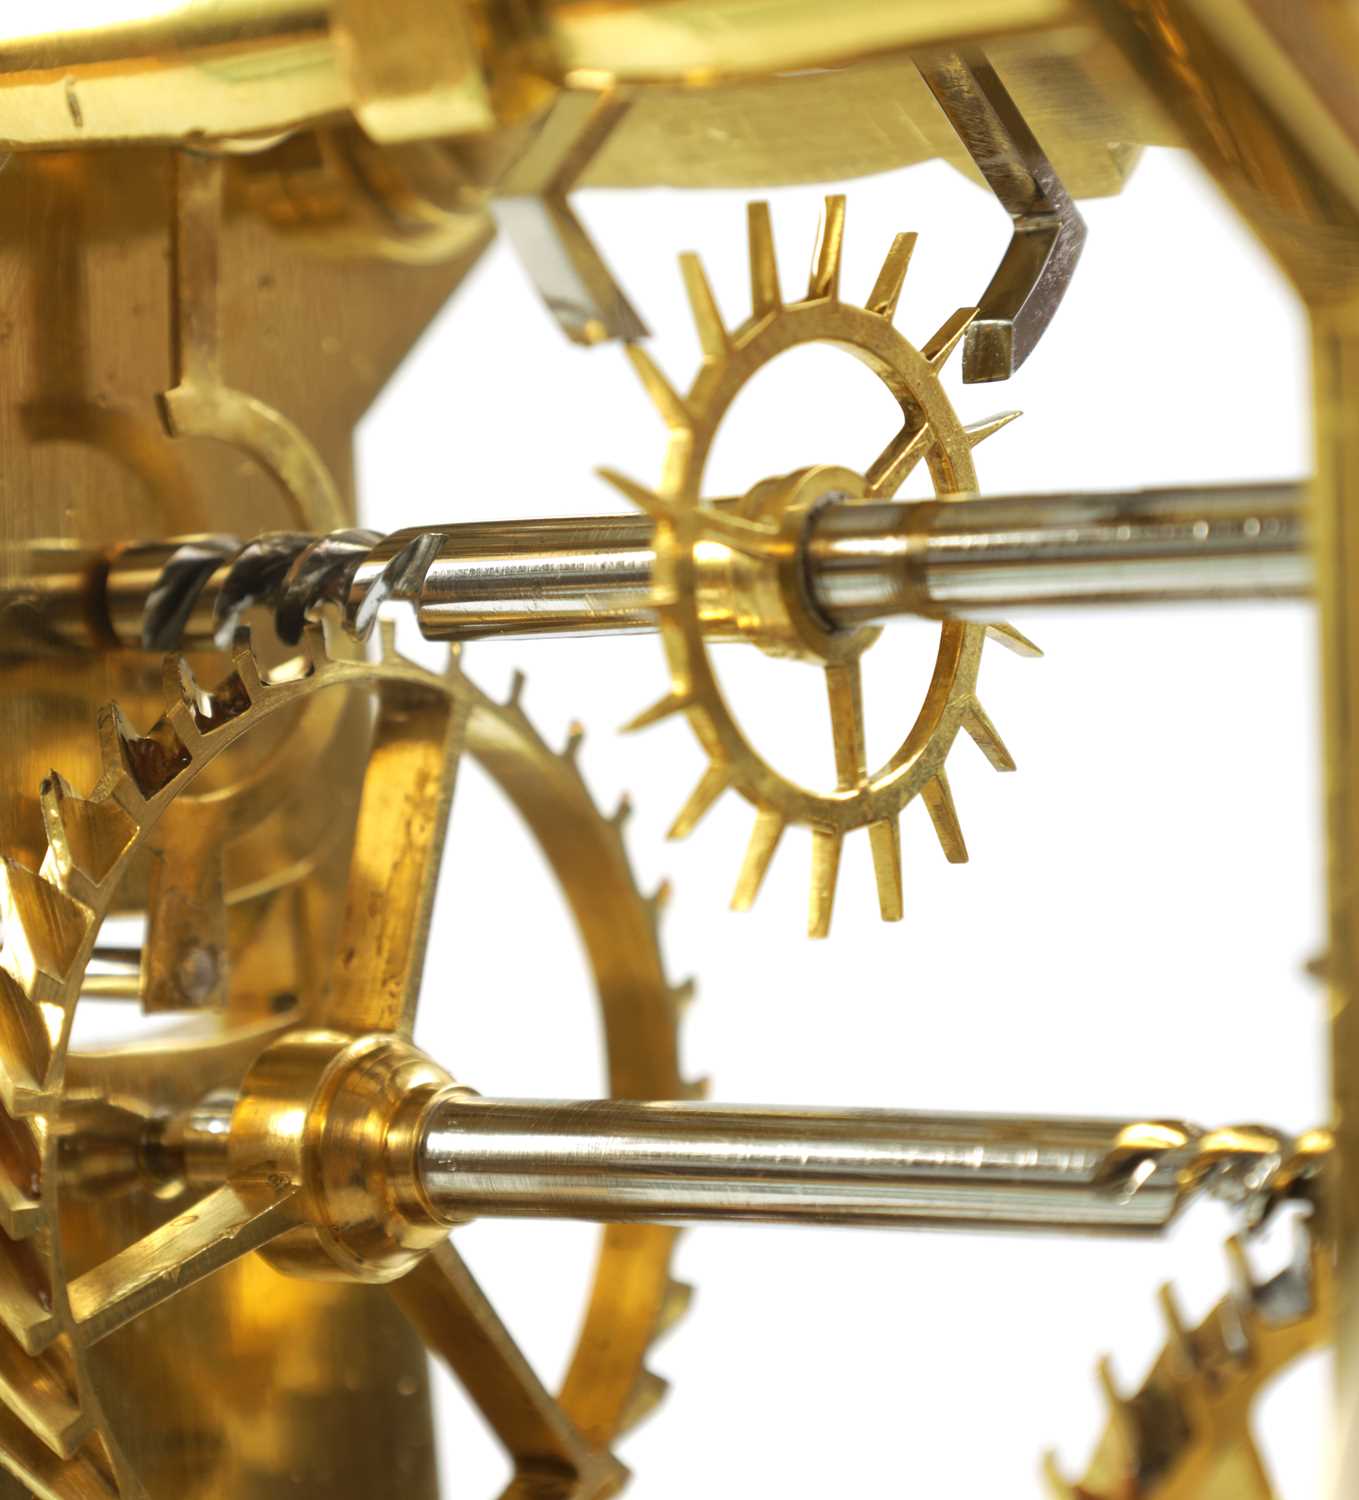 CHARLES MACDOWALL, WAKEFIELD. A RARE WILLIAM IV MONTH DURATION PATENT HELIX LEVER SKELETON CLOCK CIR - Image 7 of 9